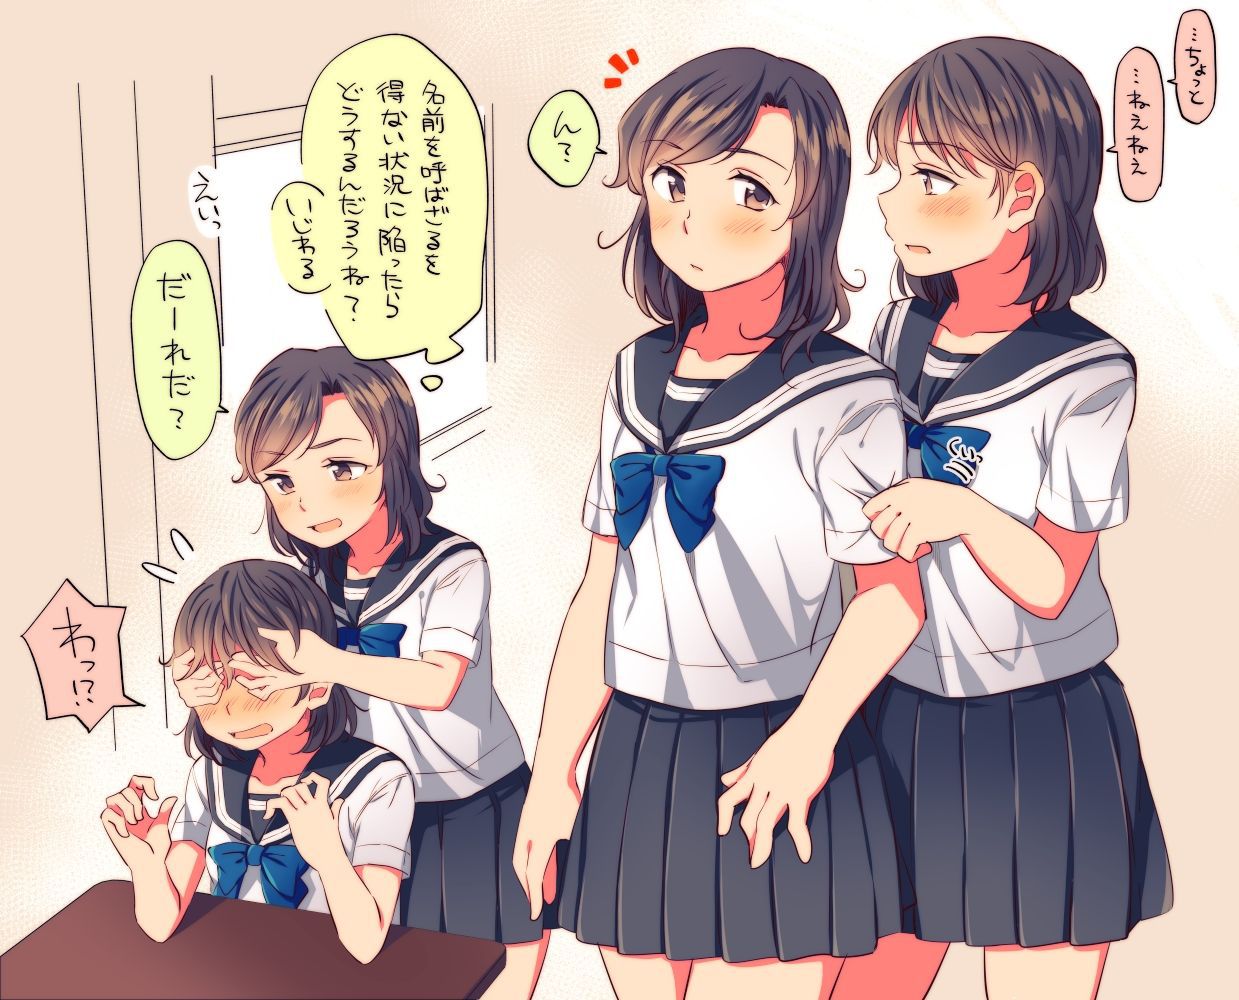 [Secondary-ZIP: Yuri lesbian image, or see other girls doing naughty things. 35